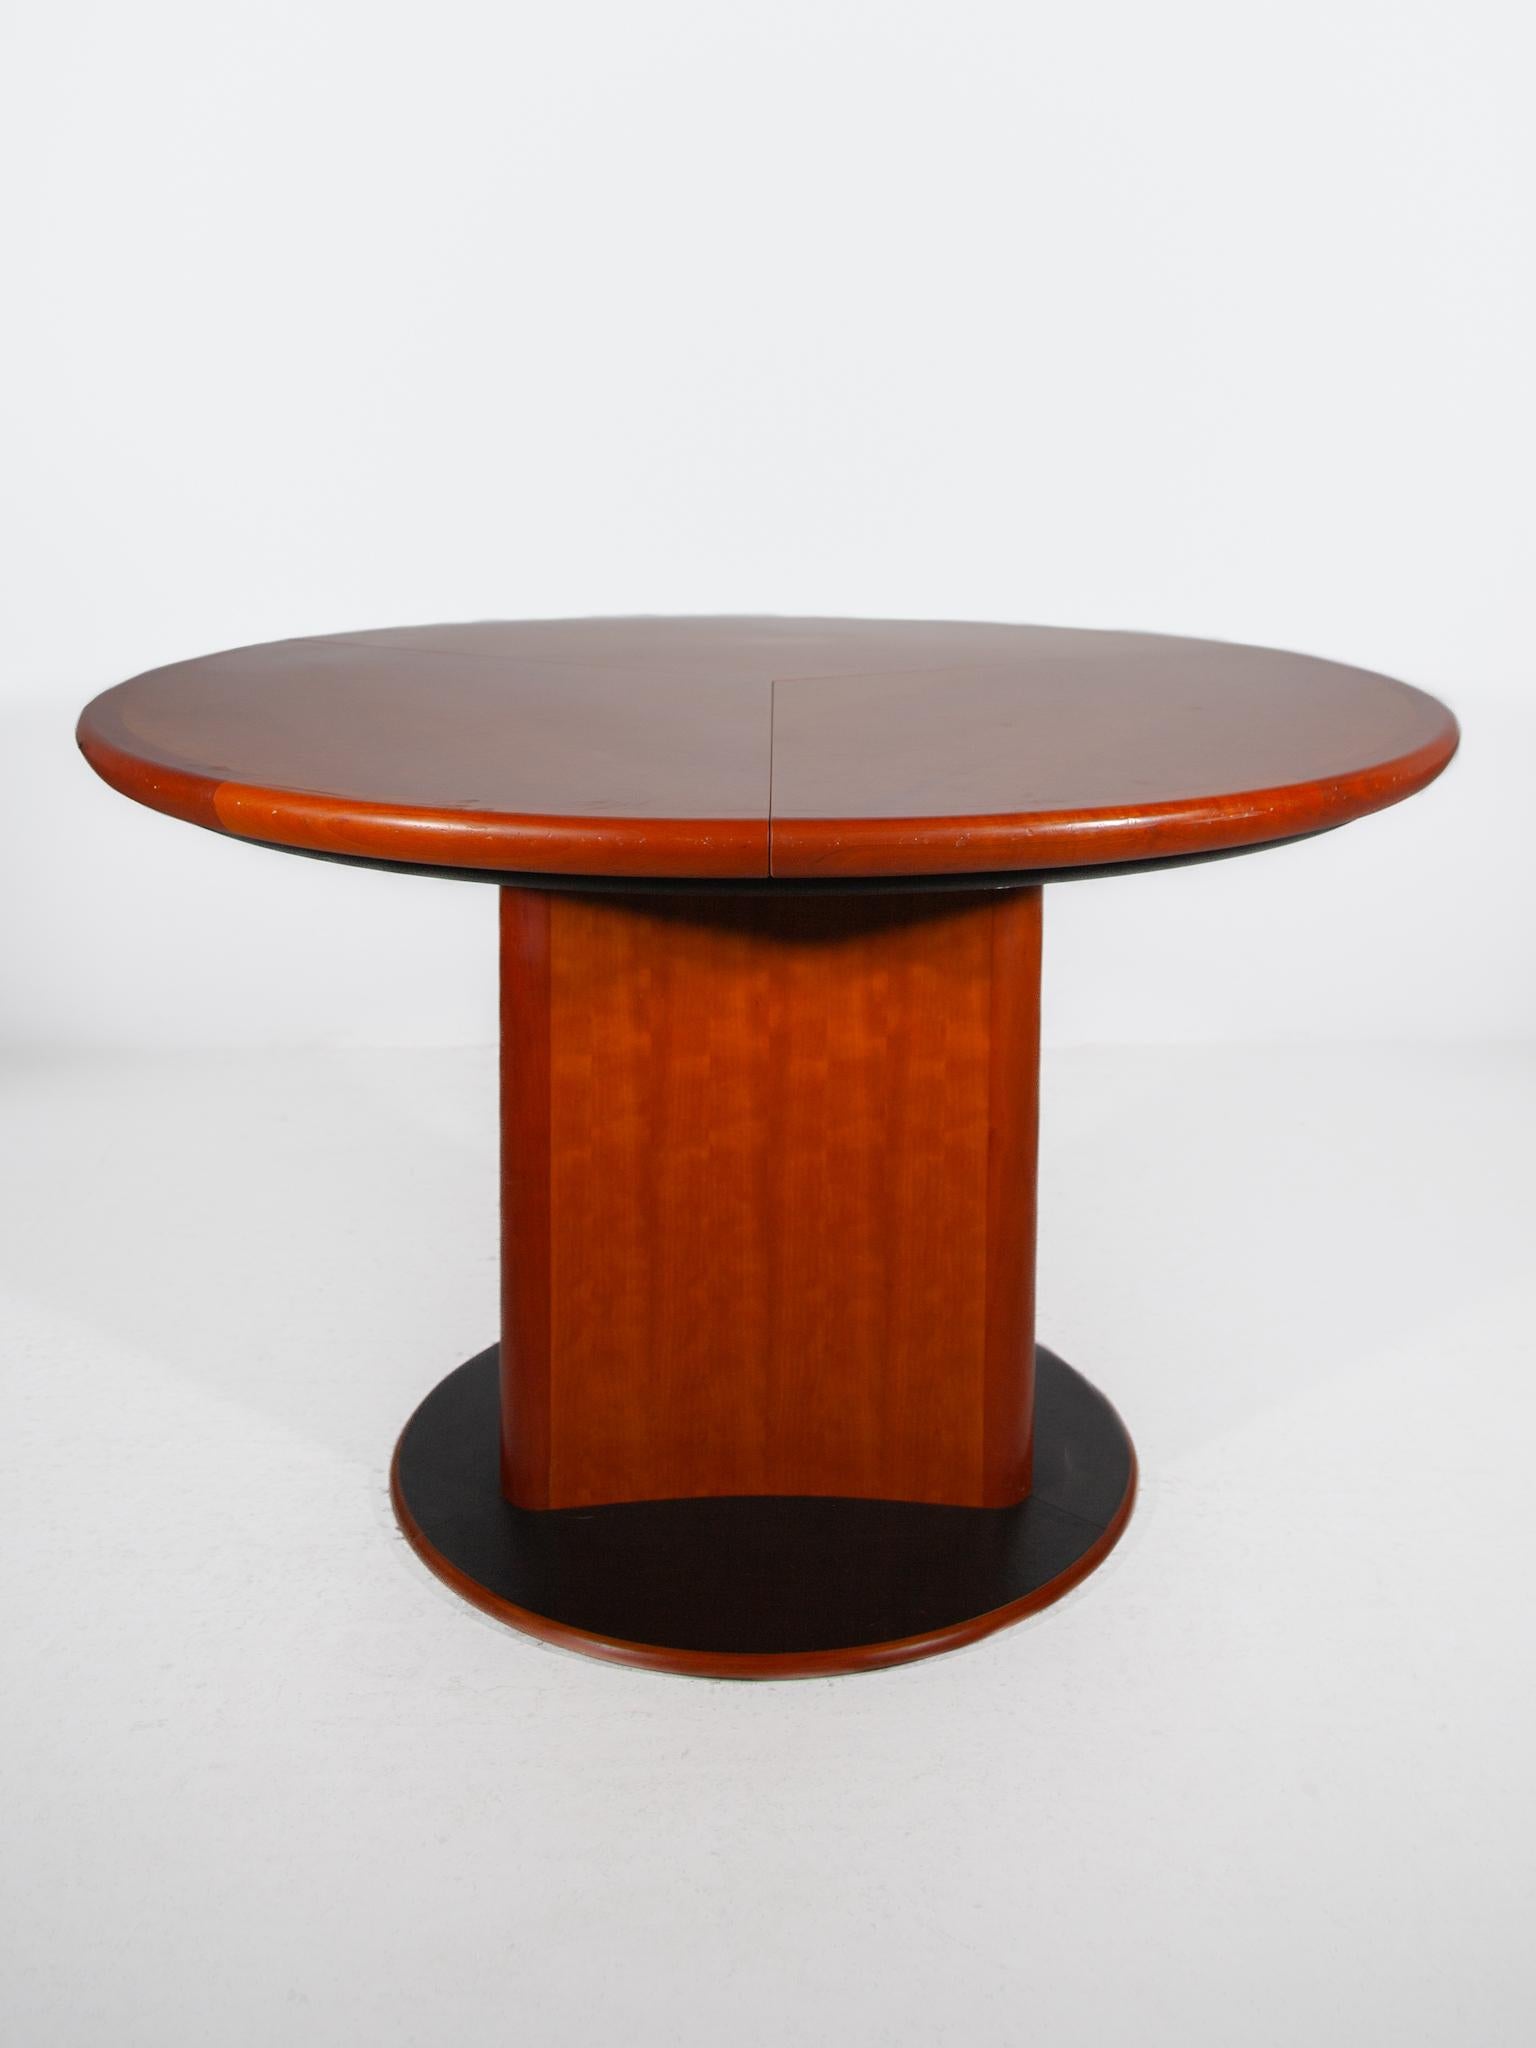 Beautiful Round Dining table designed by Skovby in 1988 Model dc06, Constructed from teak wood, the table features a curved triangular pedestal base and a round tabletop. The three leaves of the table pull outwards from a turntable mechanism to